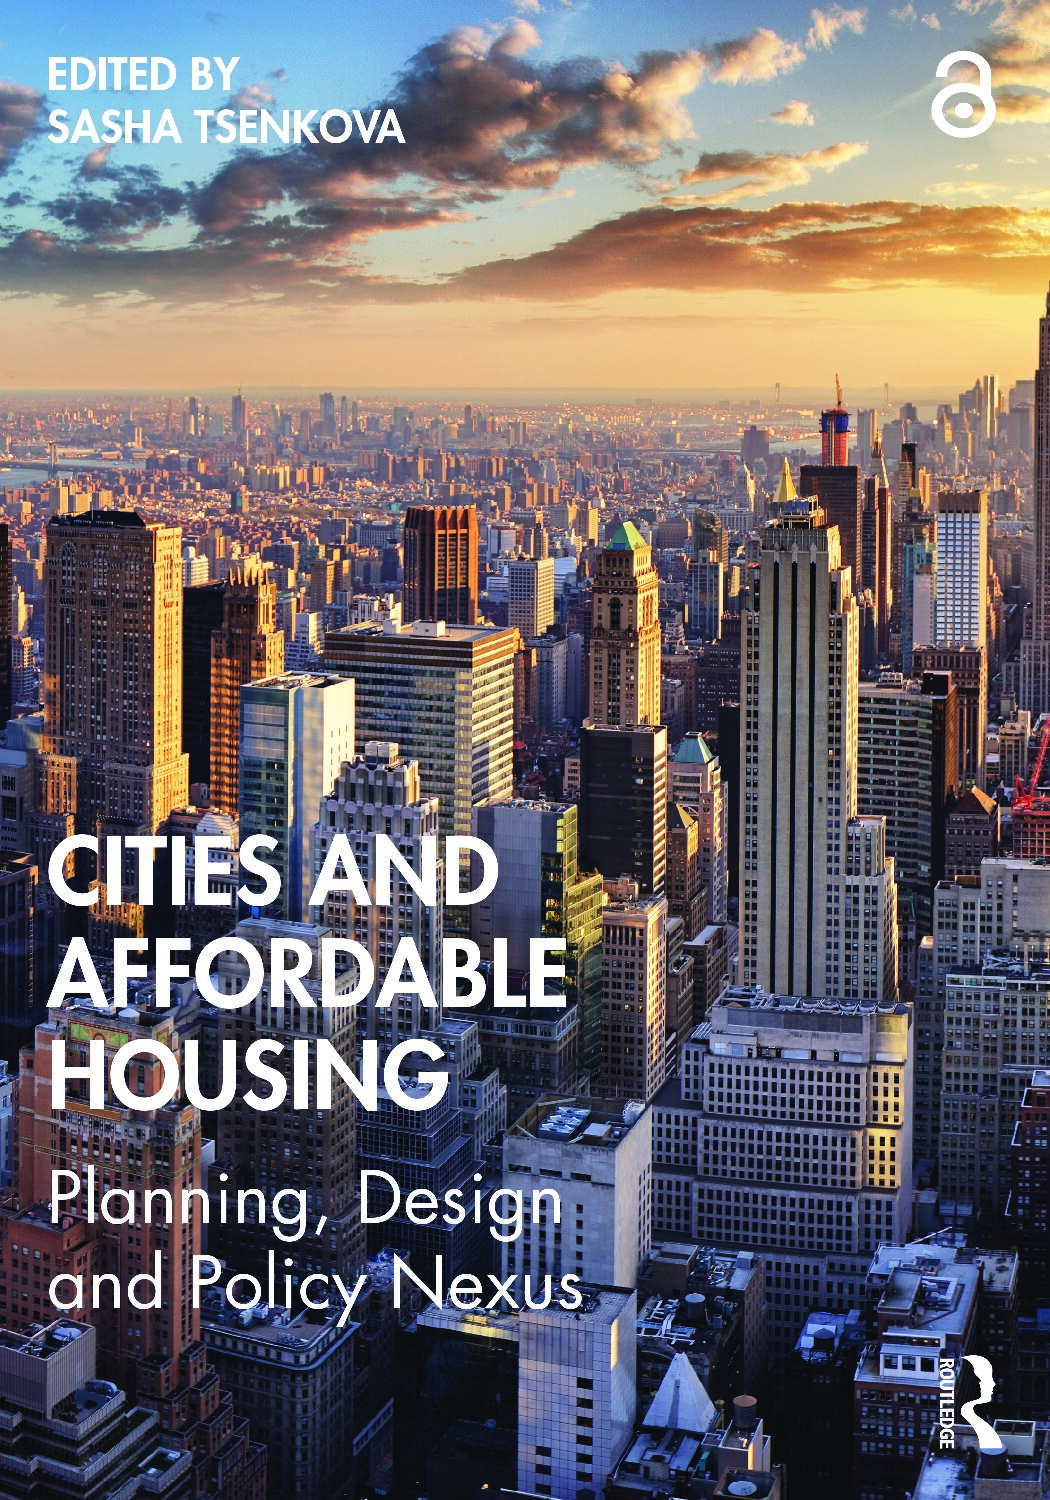 Cities and Affordable Housing; Planning, Design and Policy Nexus